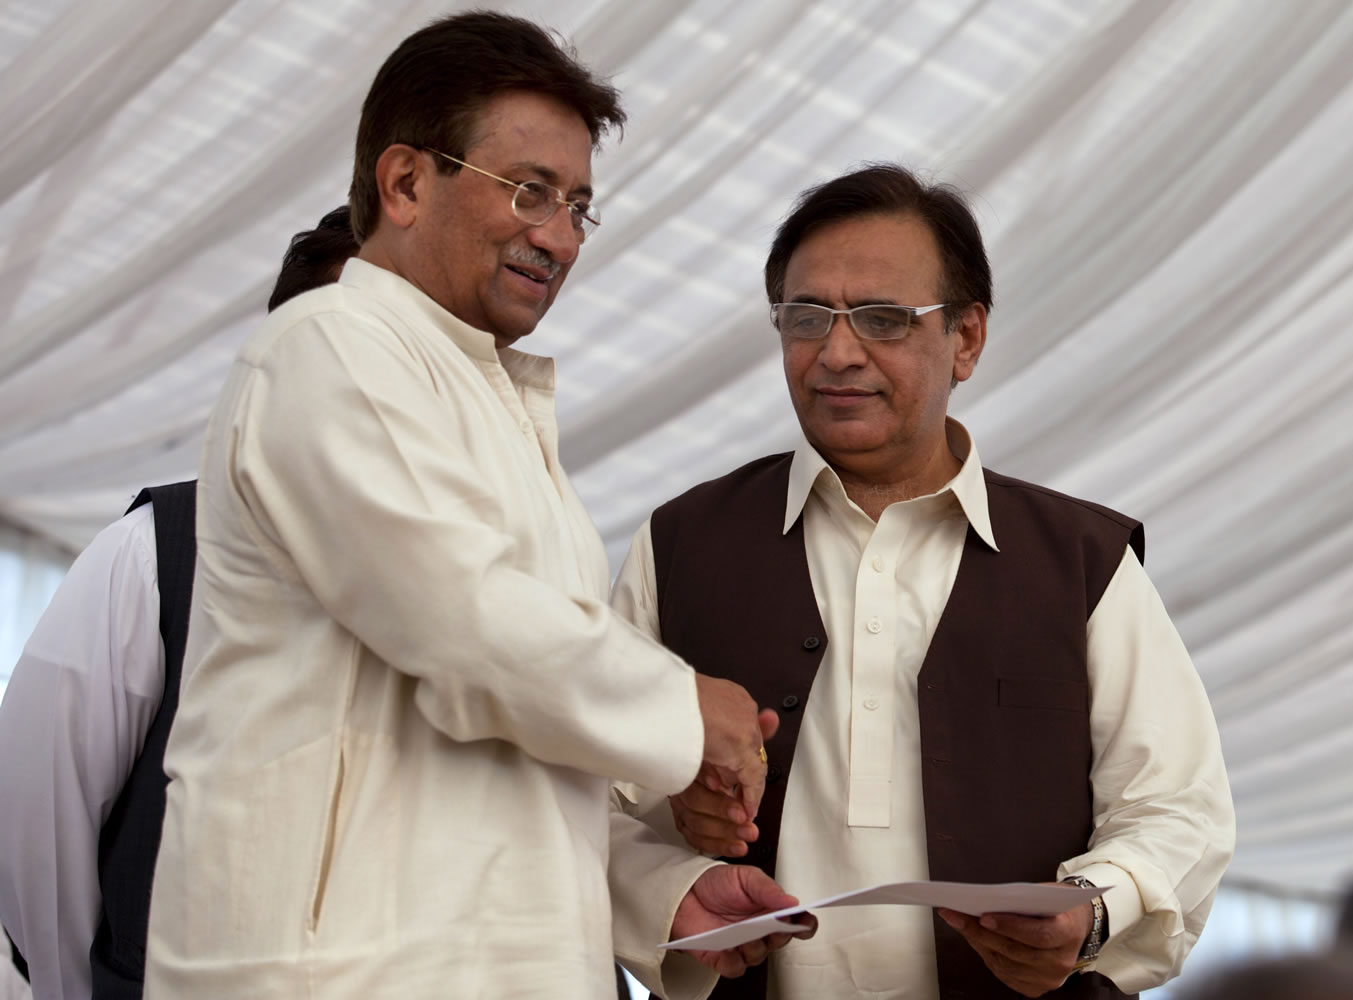 Pakistan's former President and military ruler Pervez Musharraf, left, shakes hands with Mohammad Amjad after he announces his party manifesto at his residence in Islamabad, Pakistan, on Monday.